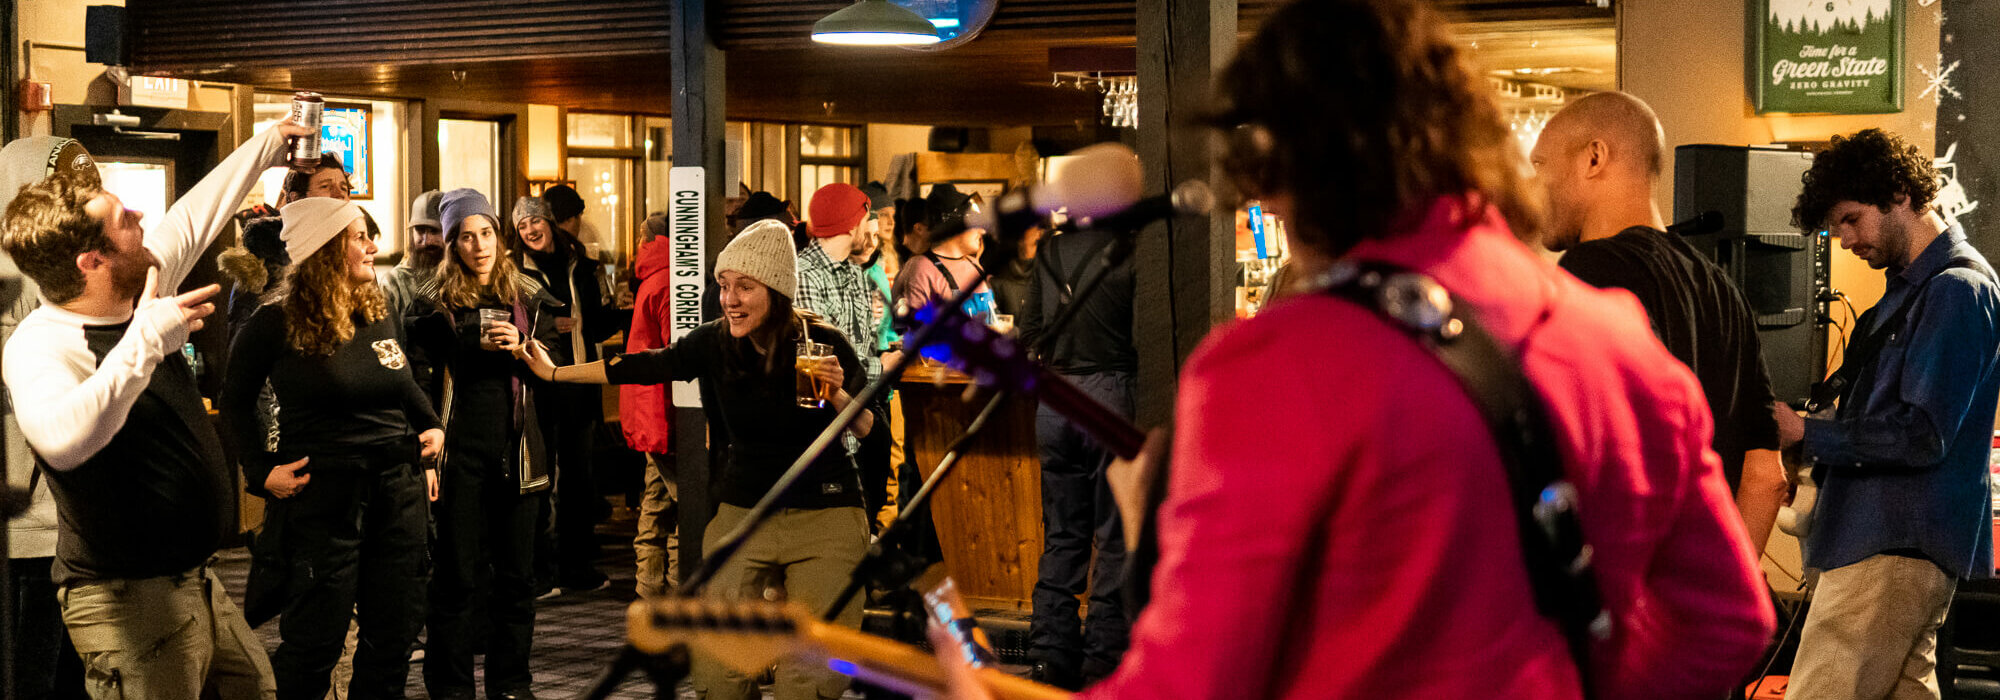 A Dancer Shows Her Moves as the Band Plays in the Tavern